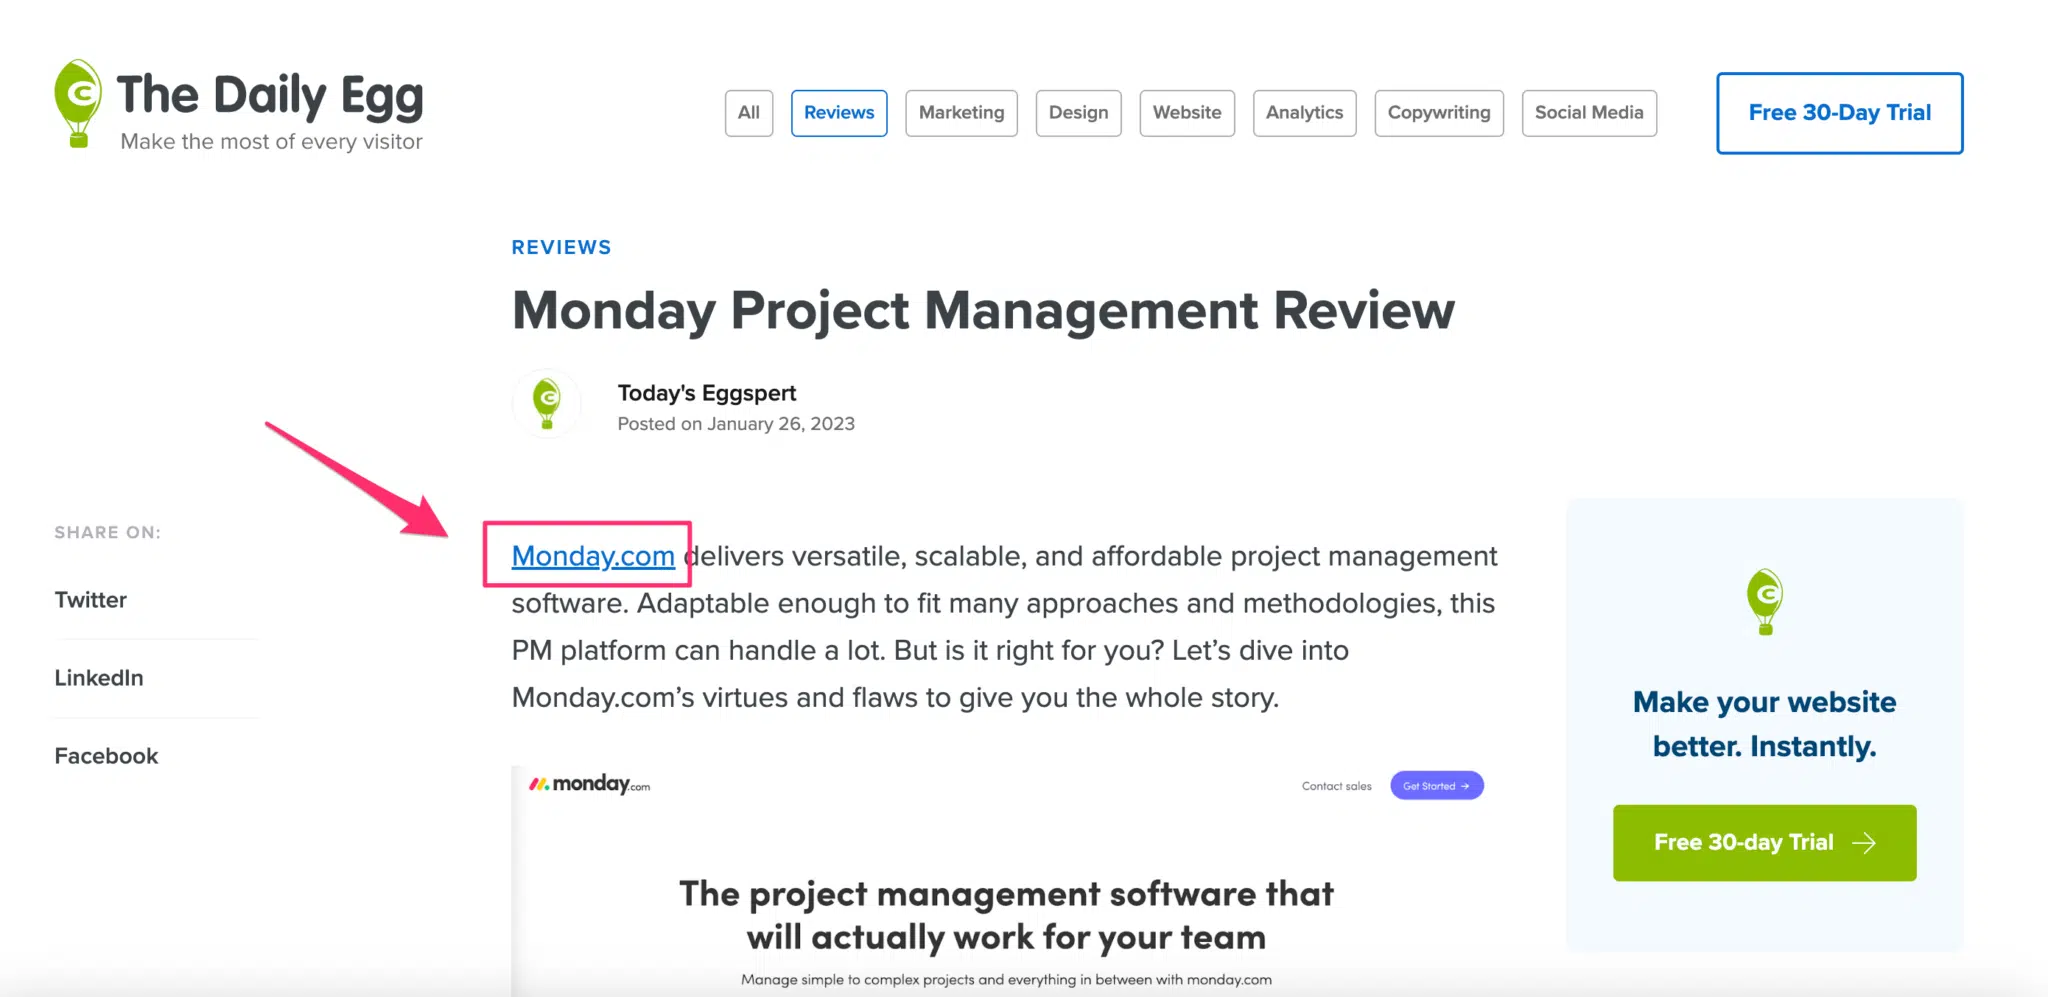 Monday.com project management review on The Daily Egg